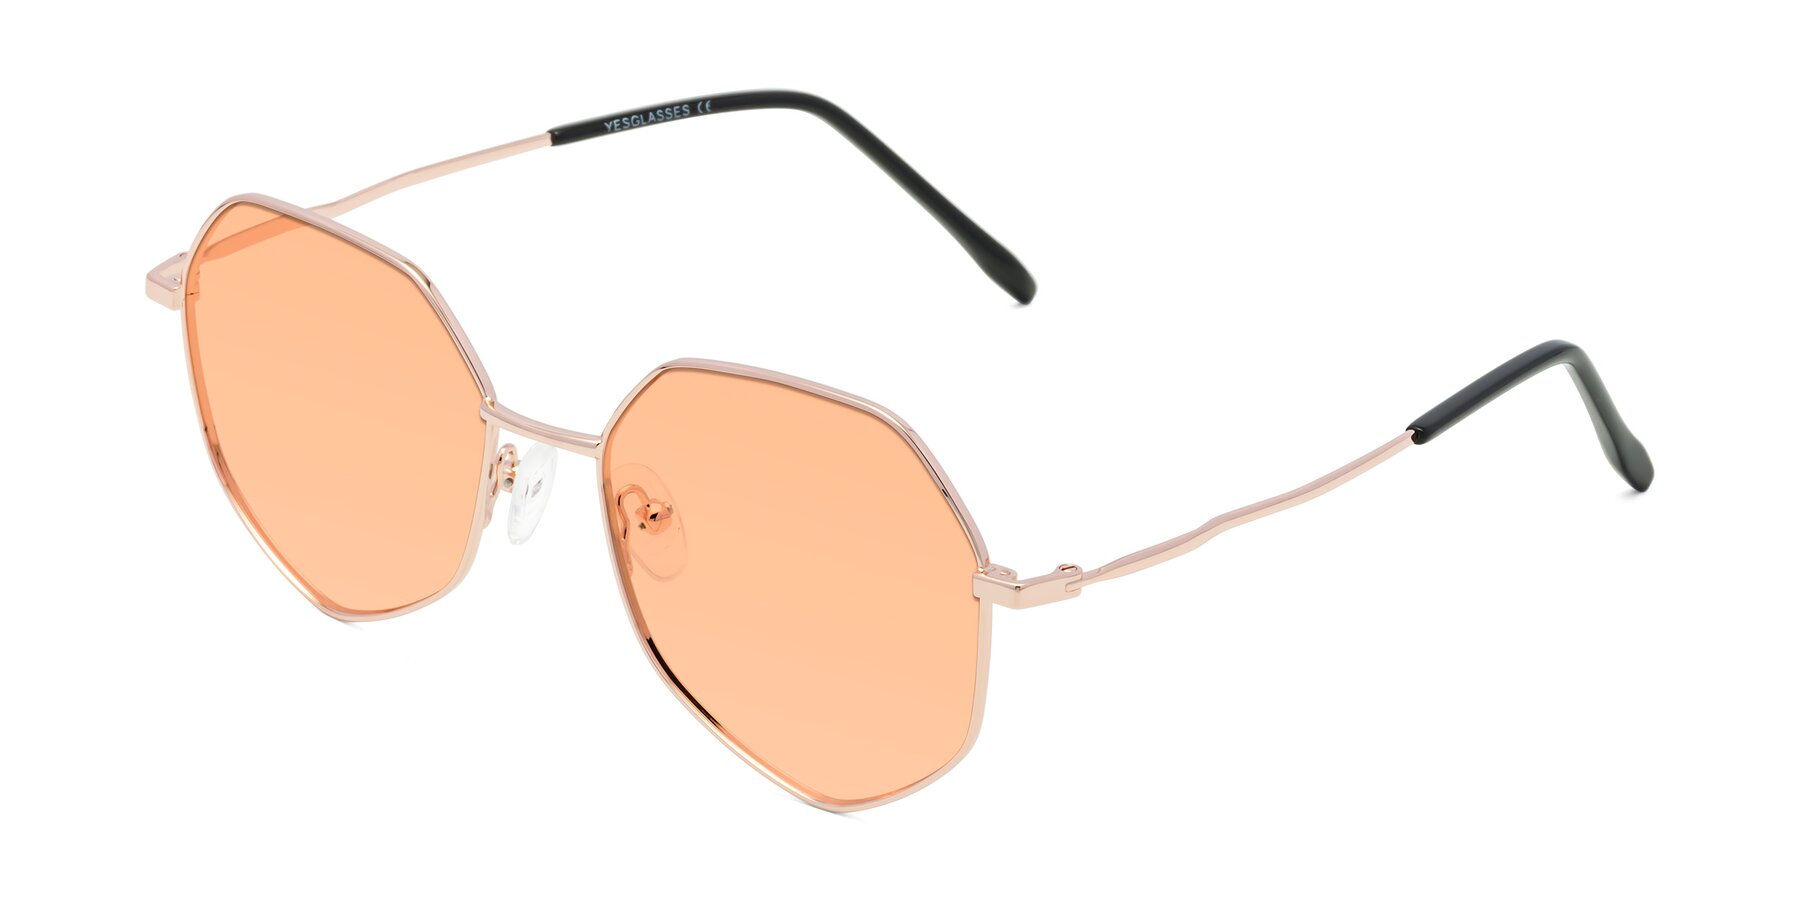 Angle of Sunshine in Rose Gold with Light Orange Tinted Lenses